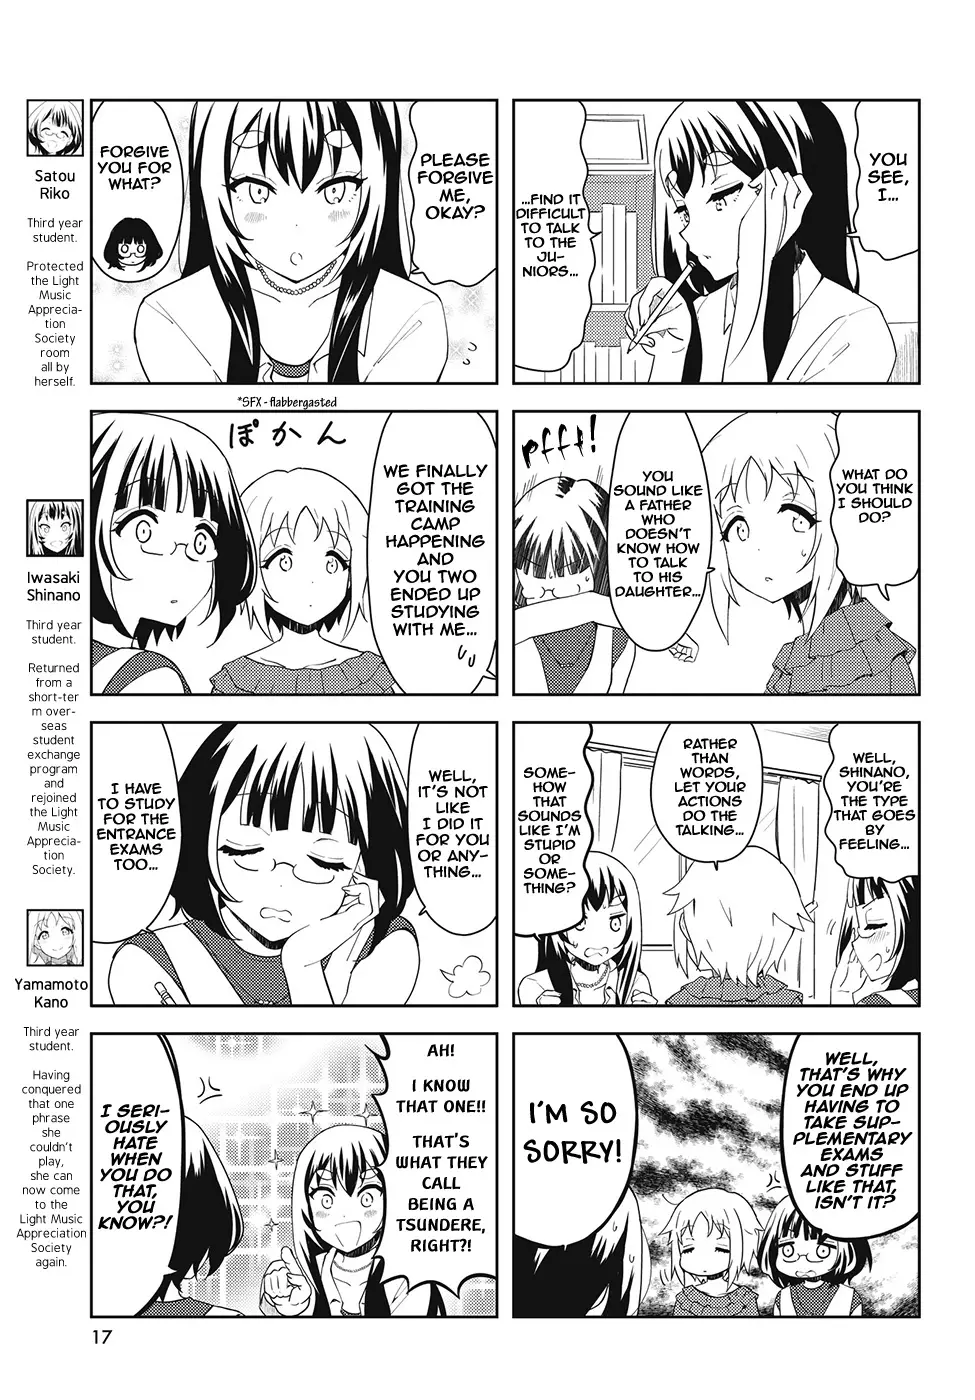 K-On! Shuffle - 35 page 3-17985164